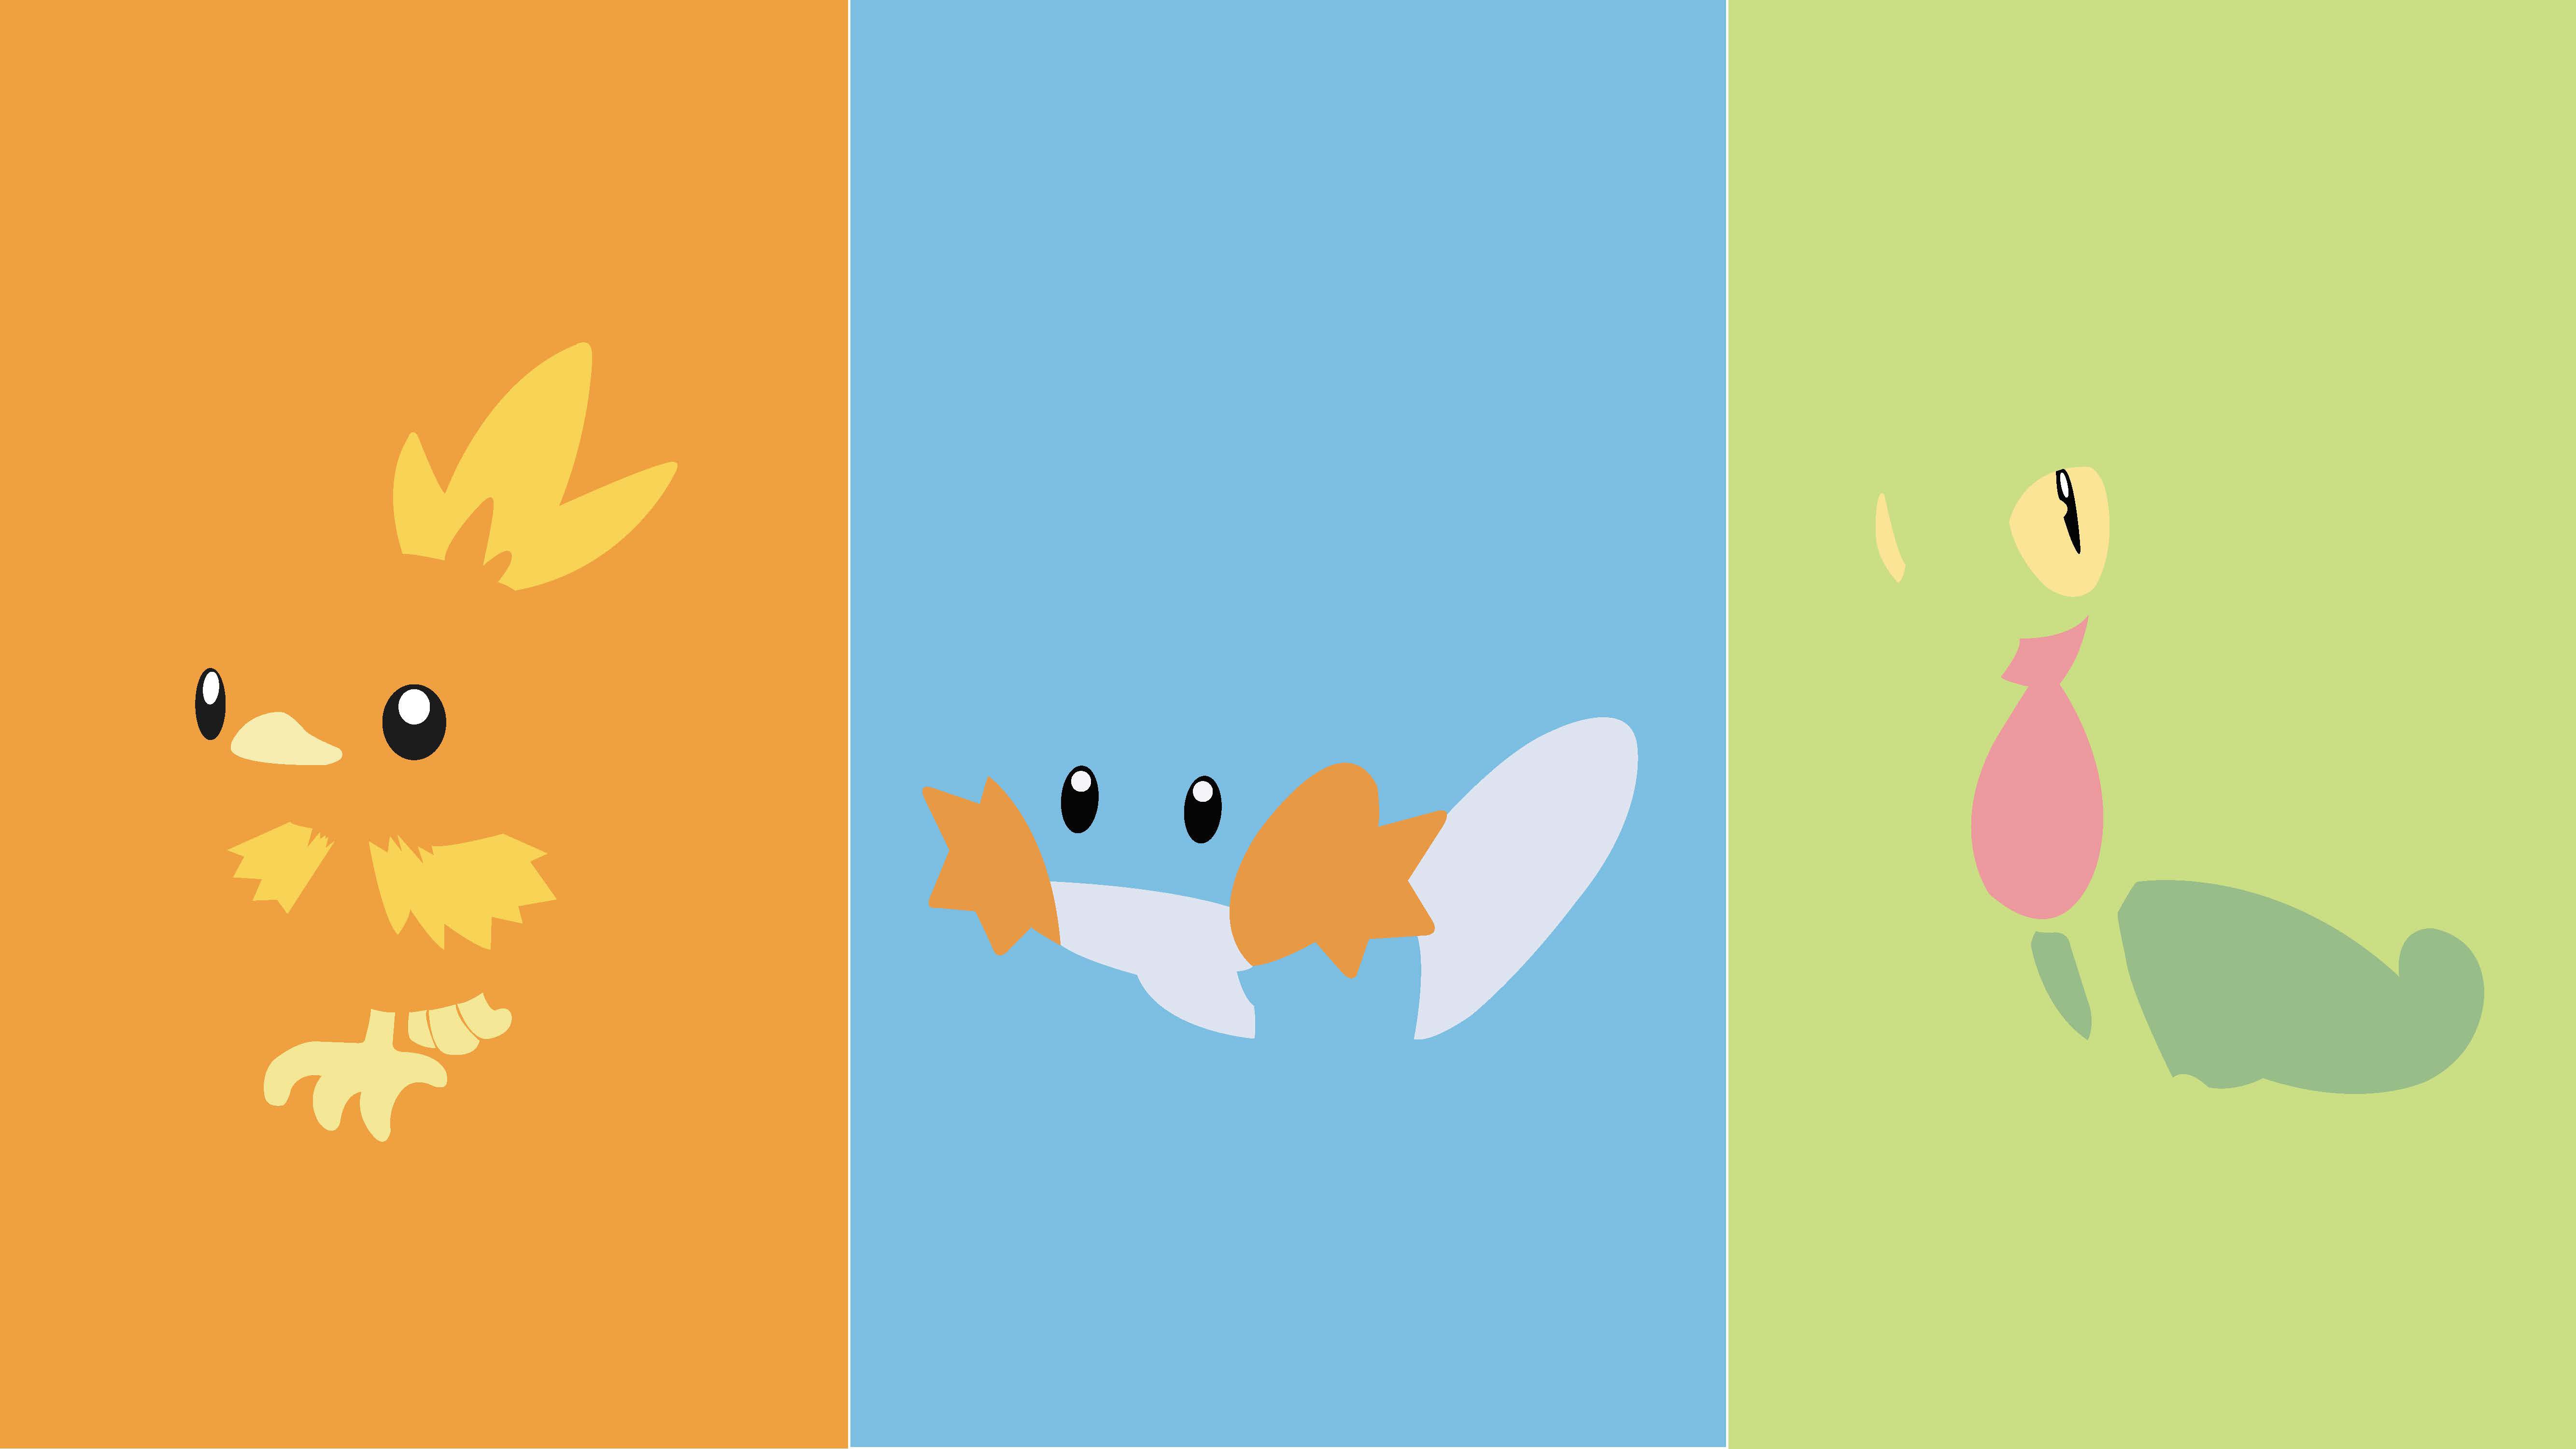 A gen 3 starter wallpaper I created. Use it if you'd like! I got the inspiration from a Torchic design of this style I found, so this wasn't my original idea. [1920x1080]